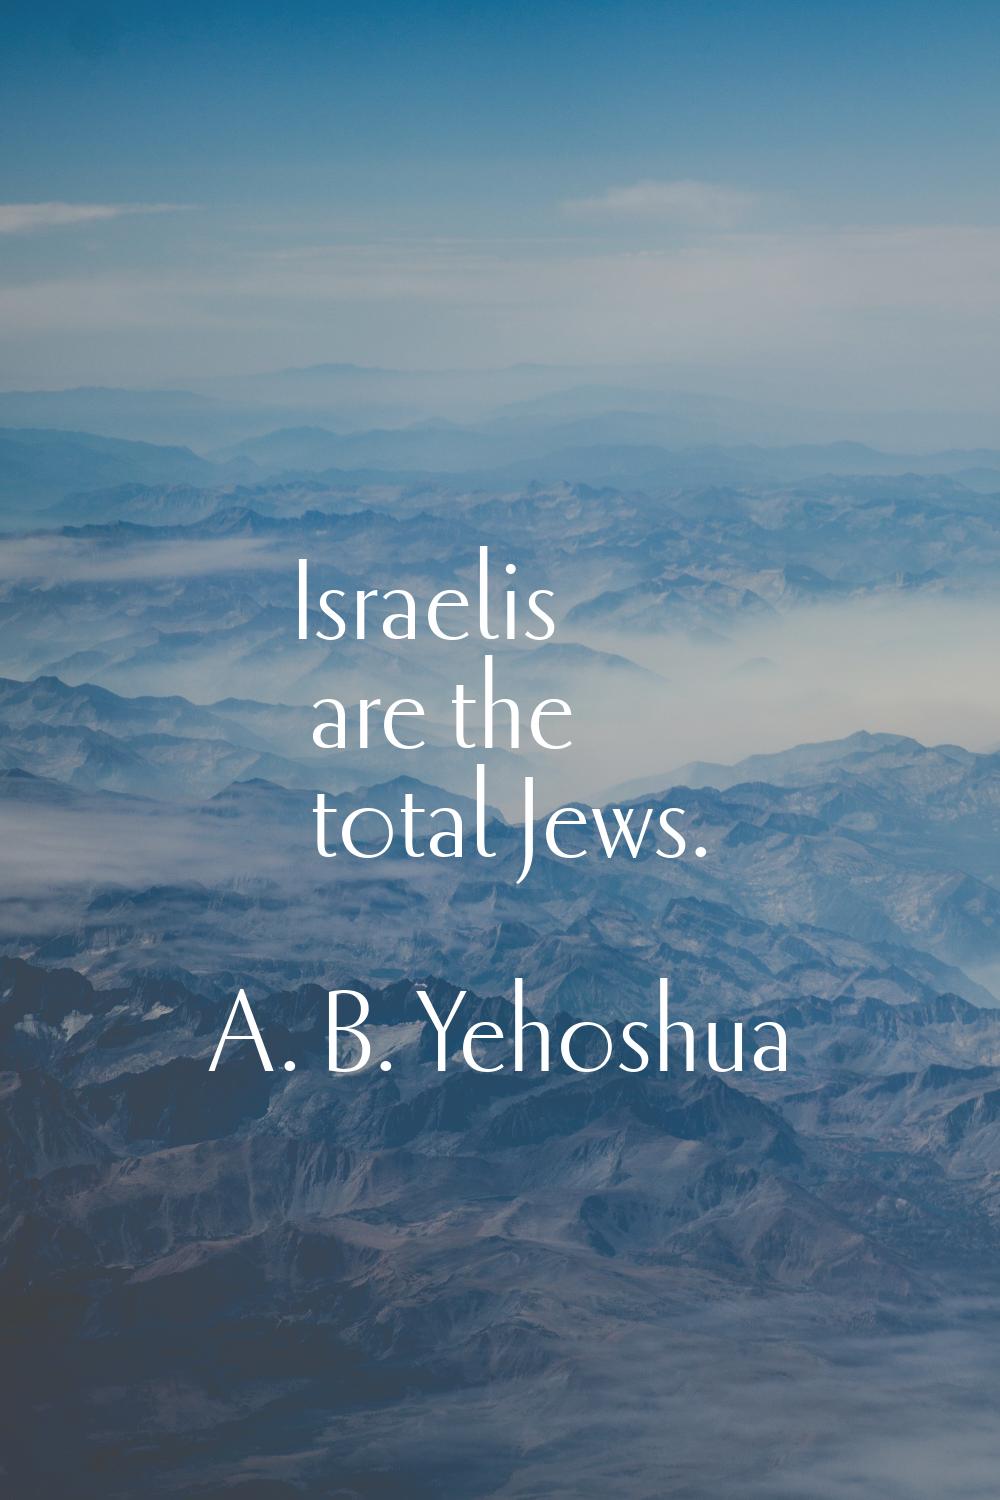 Israelis are the total Jews.